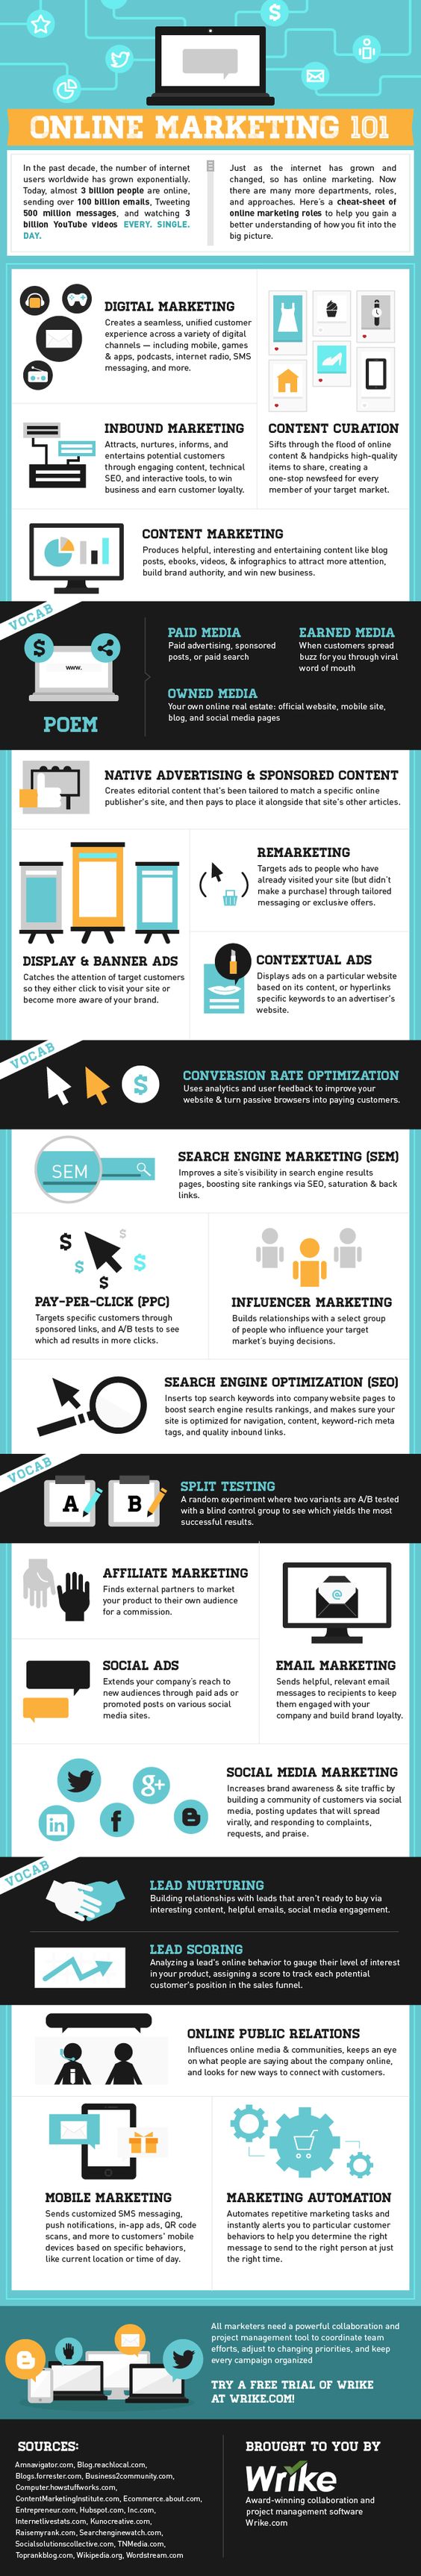 Infographic Of The Week: Online Marketing 101